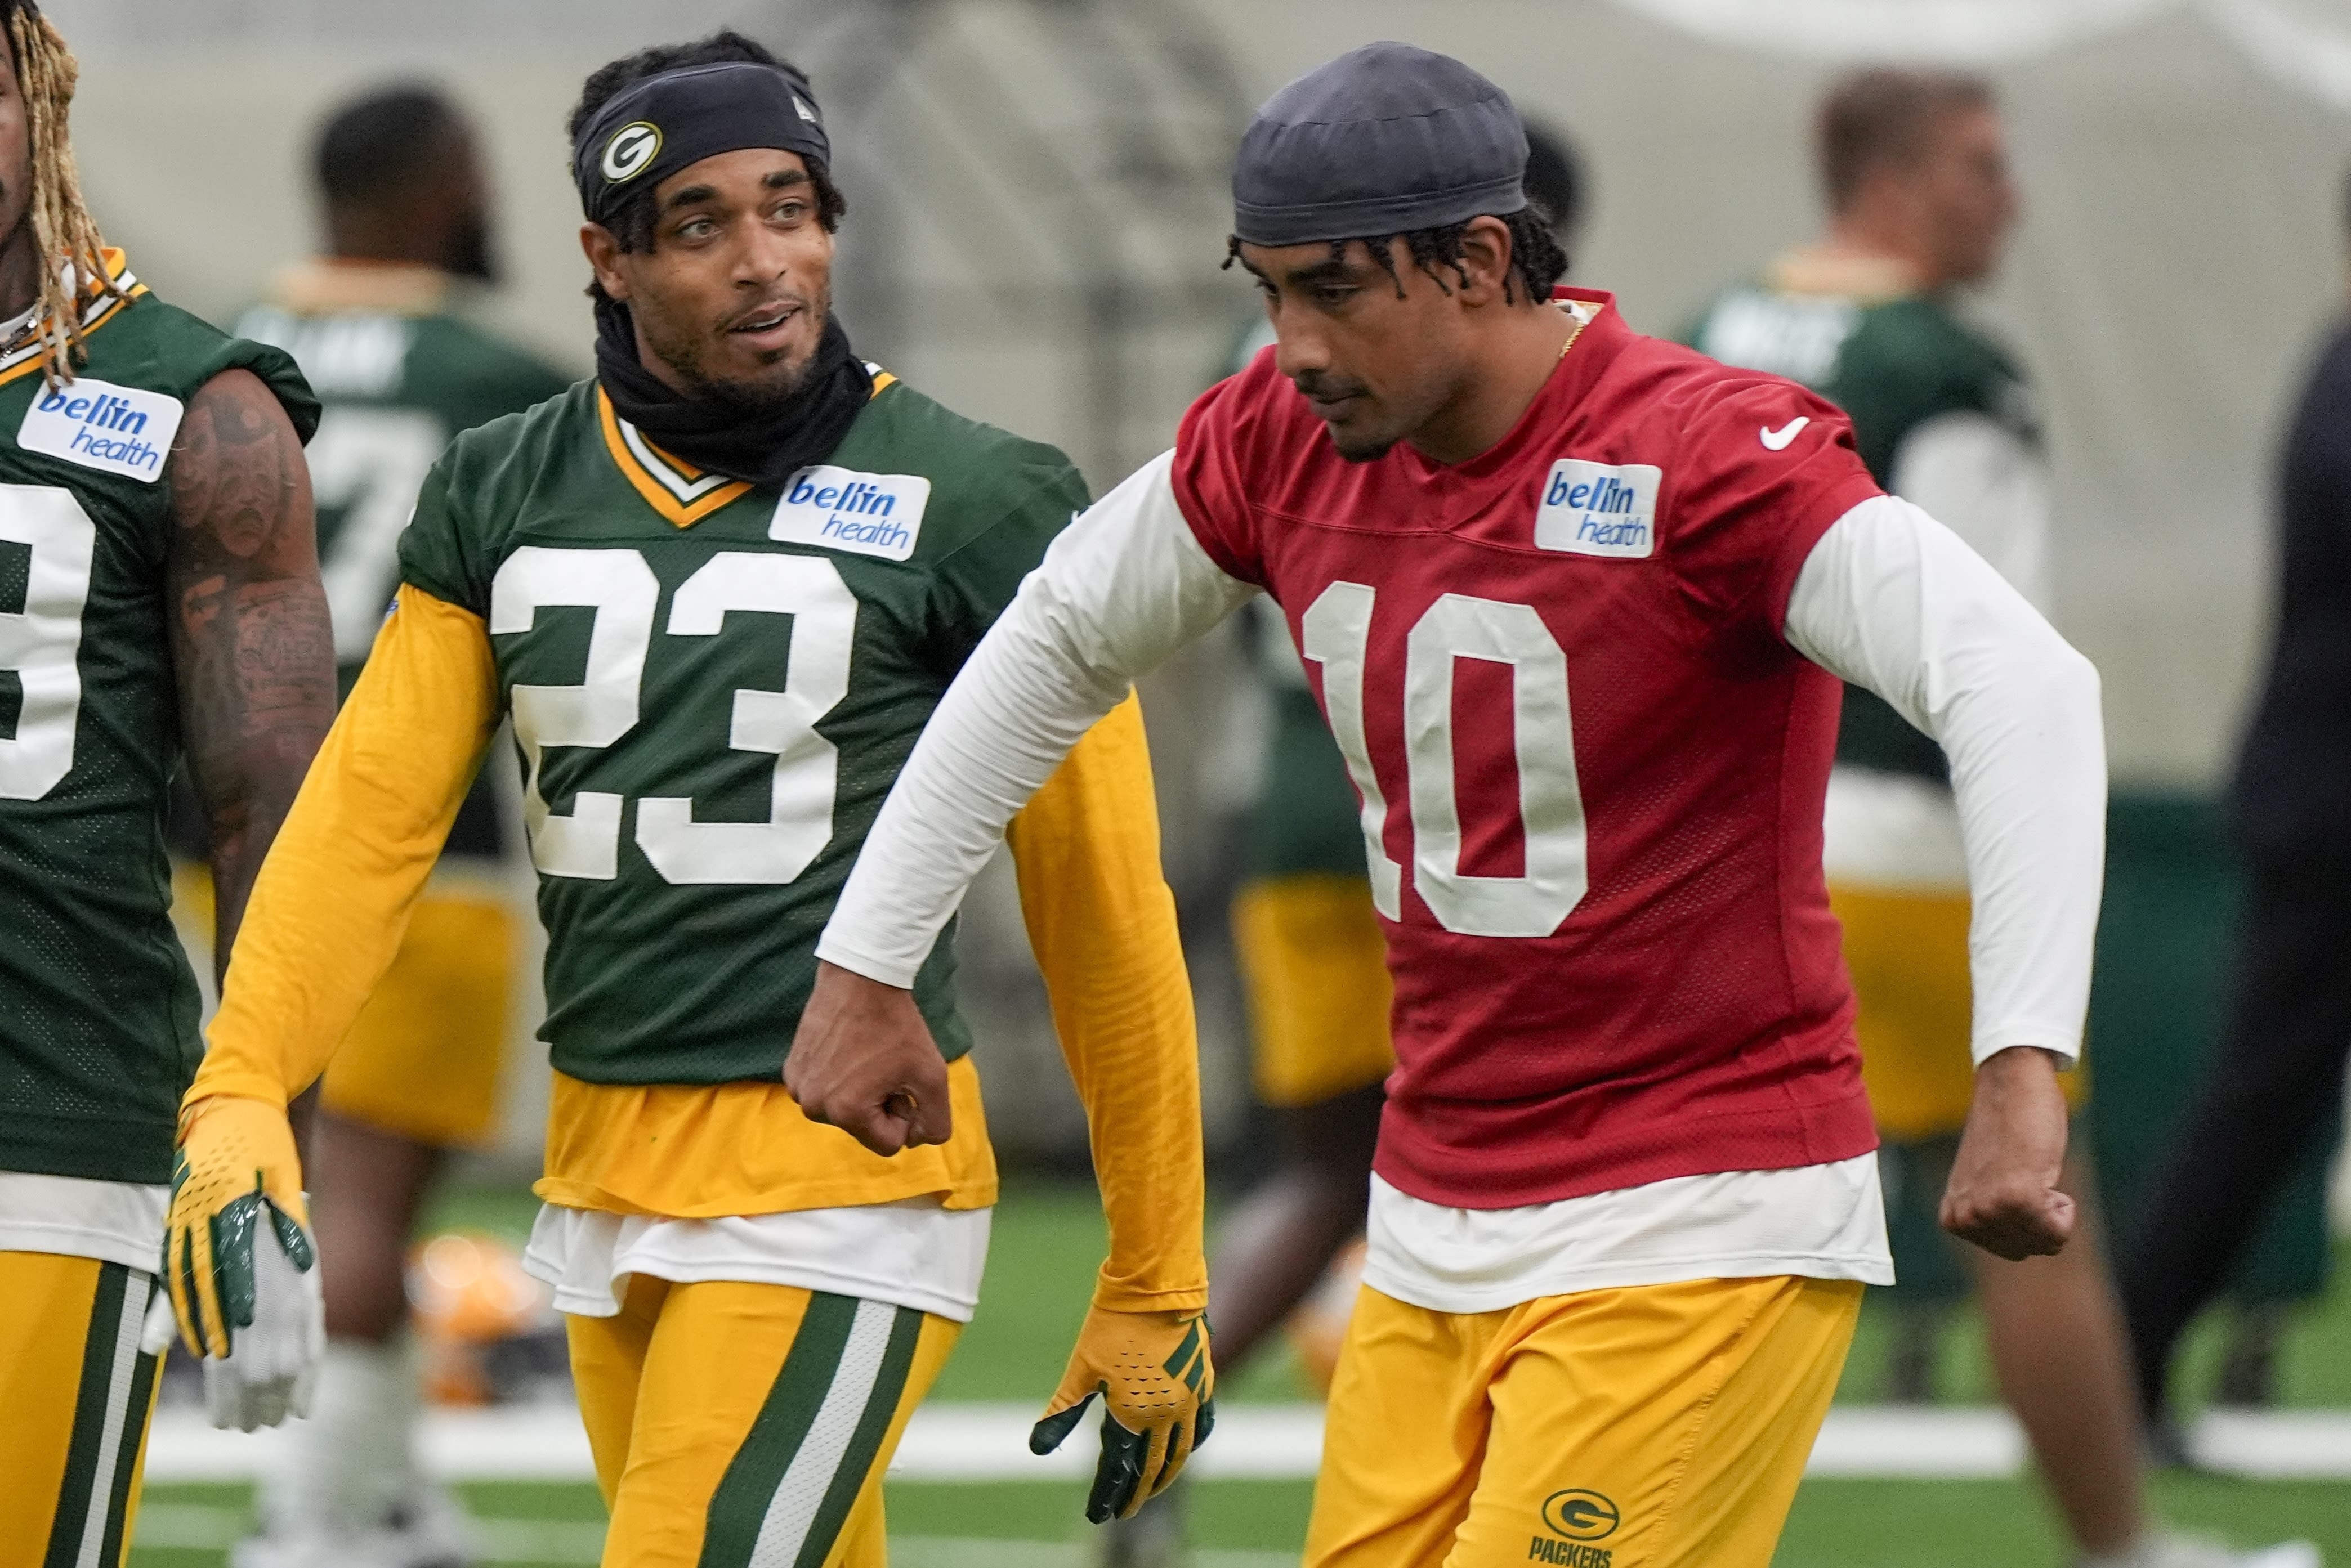 Packers' Jordan Love stays mum on contract talks while focusing on how he can build off his success